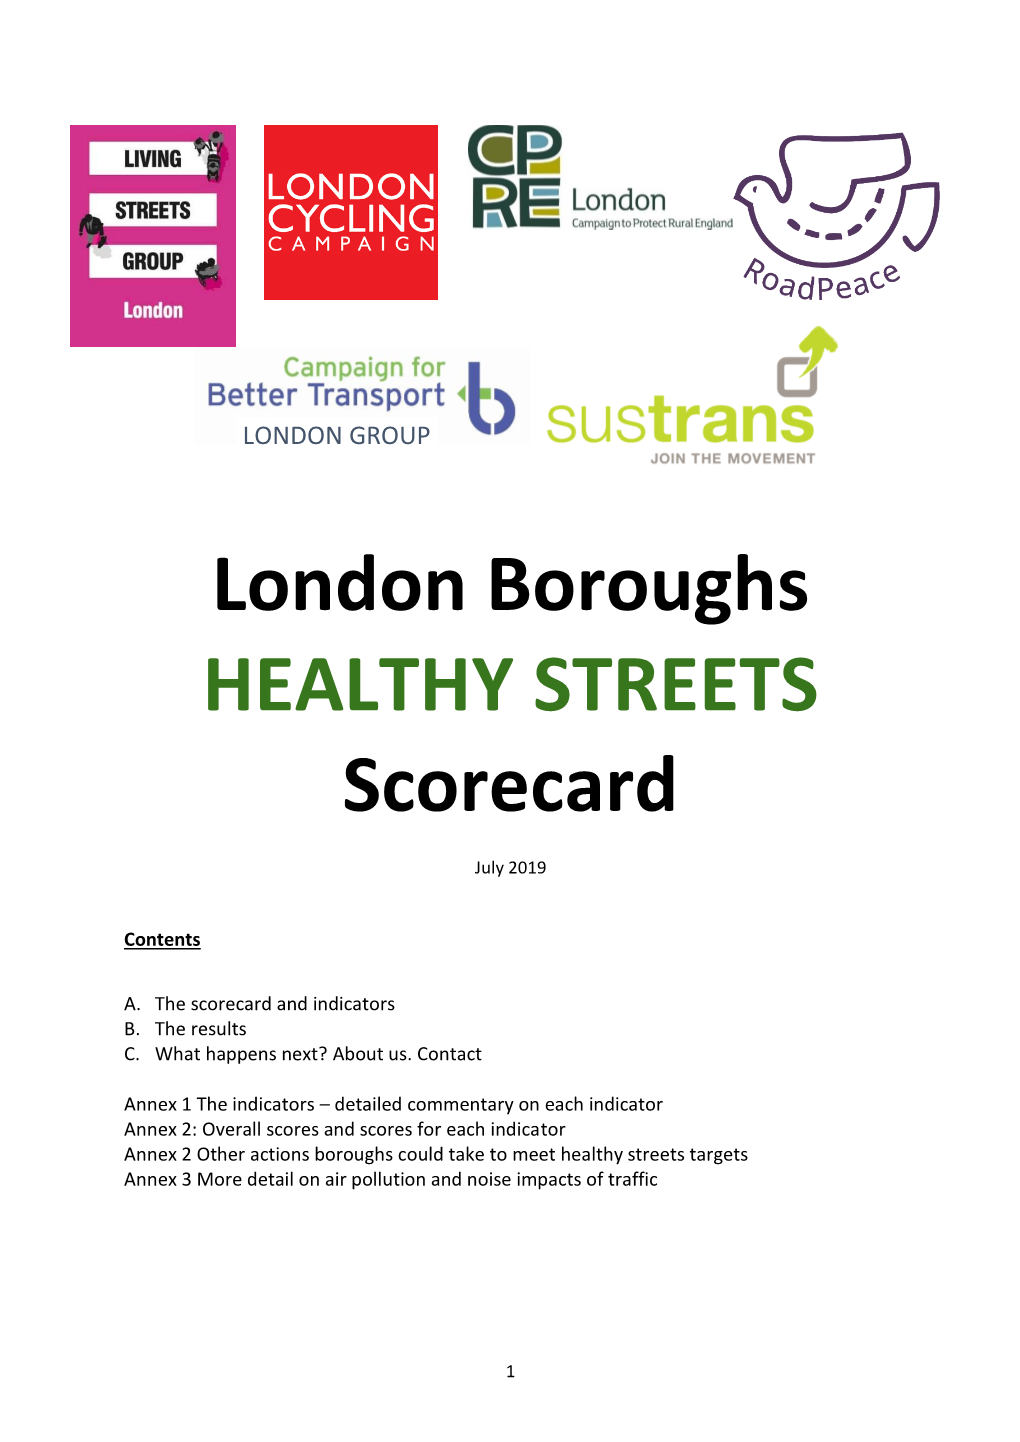 London Boroughs Healthy Streets Scorecard, Which Will Be Updated Annually, Aims to Help Answer These Questions and Promote Action